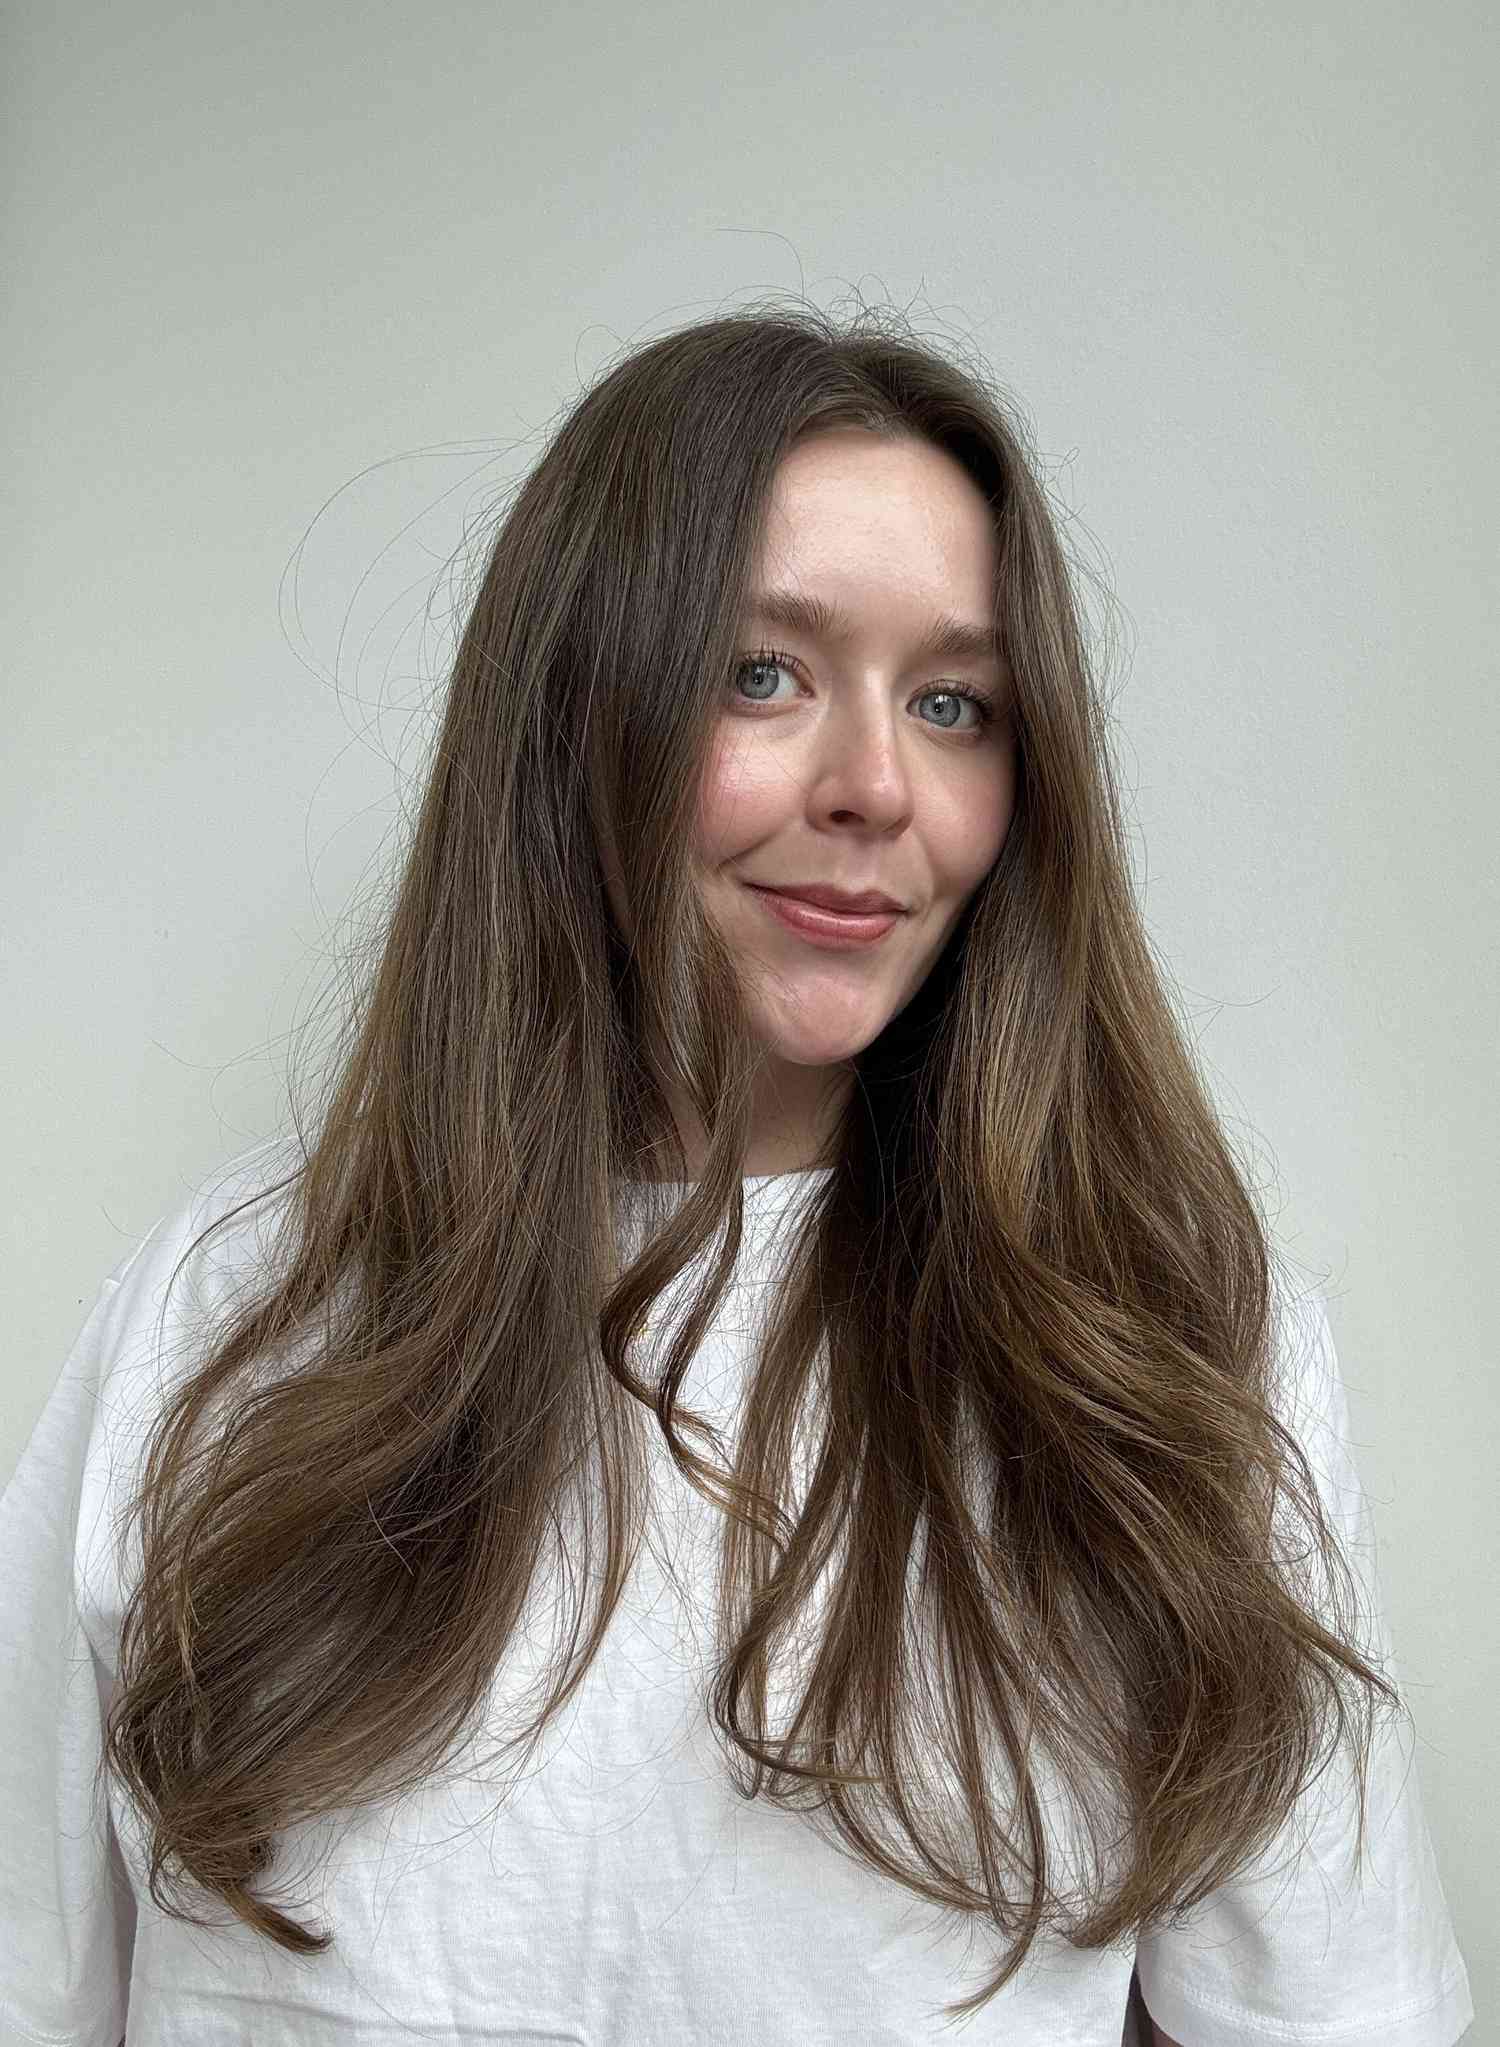 editor after using the Commence 2-in-1 Instant Dry Shampoo